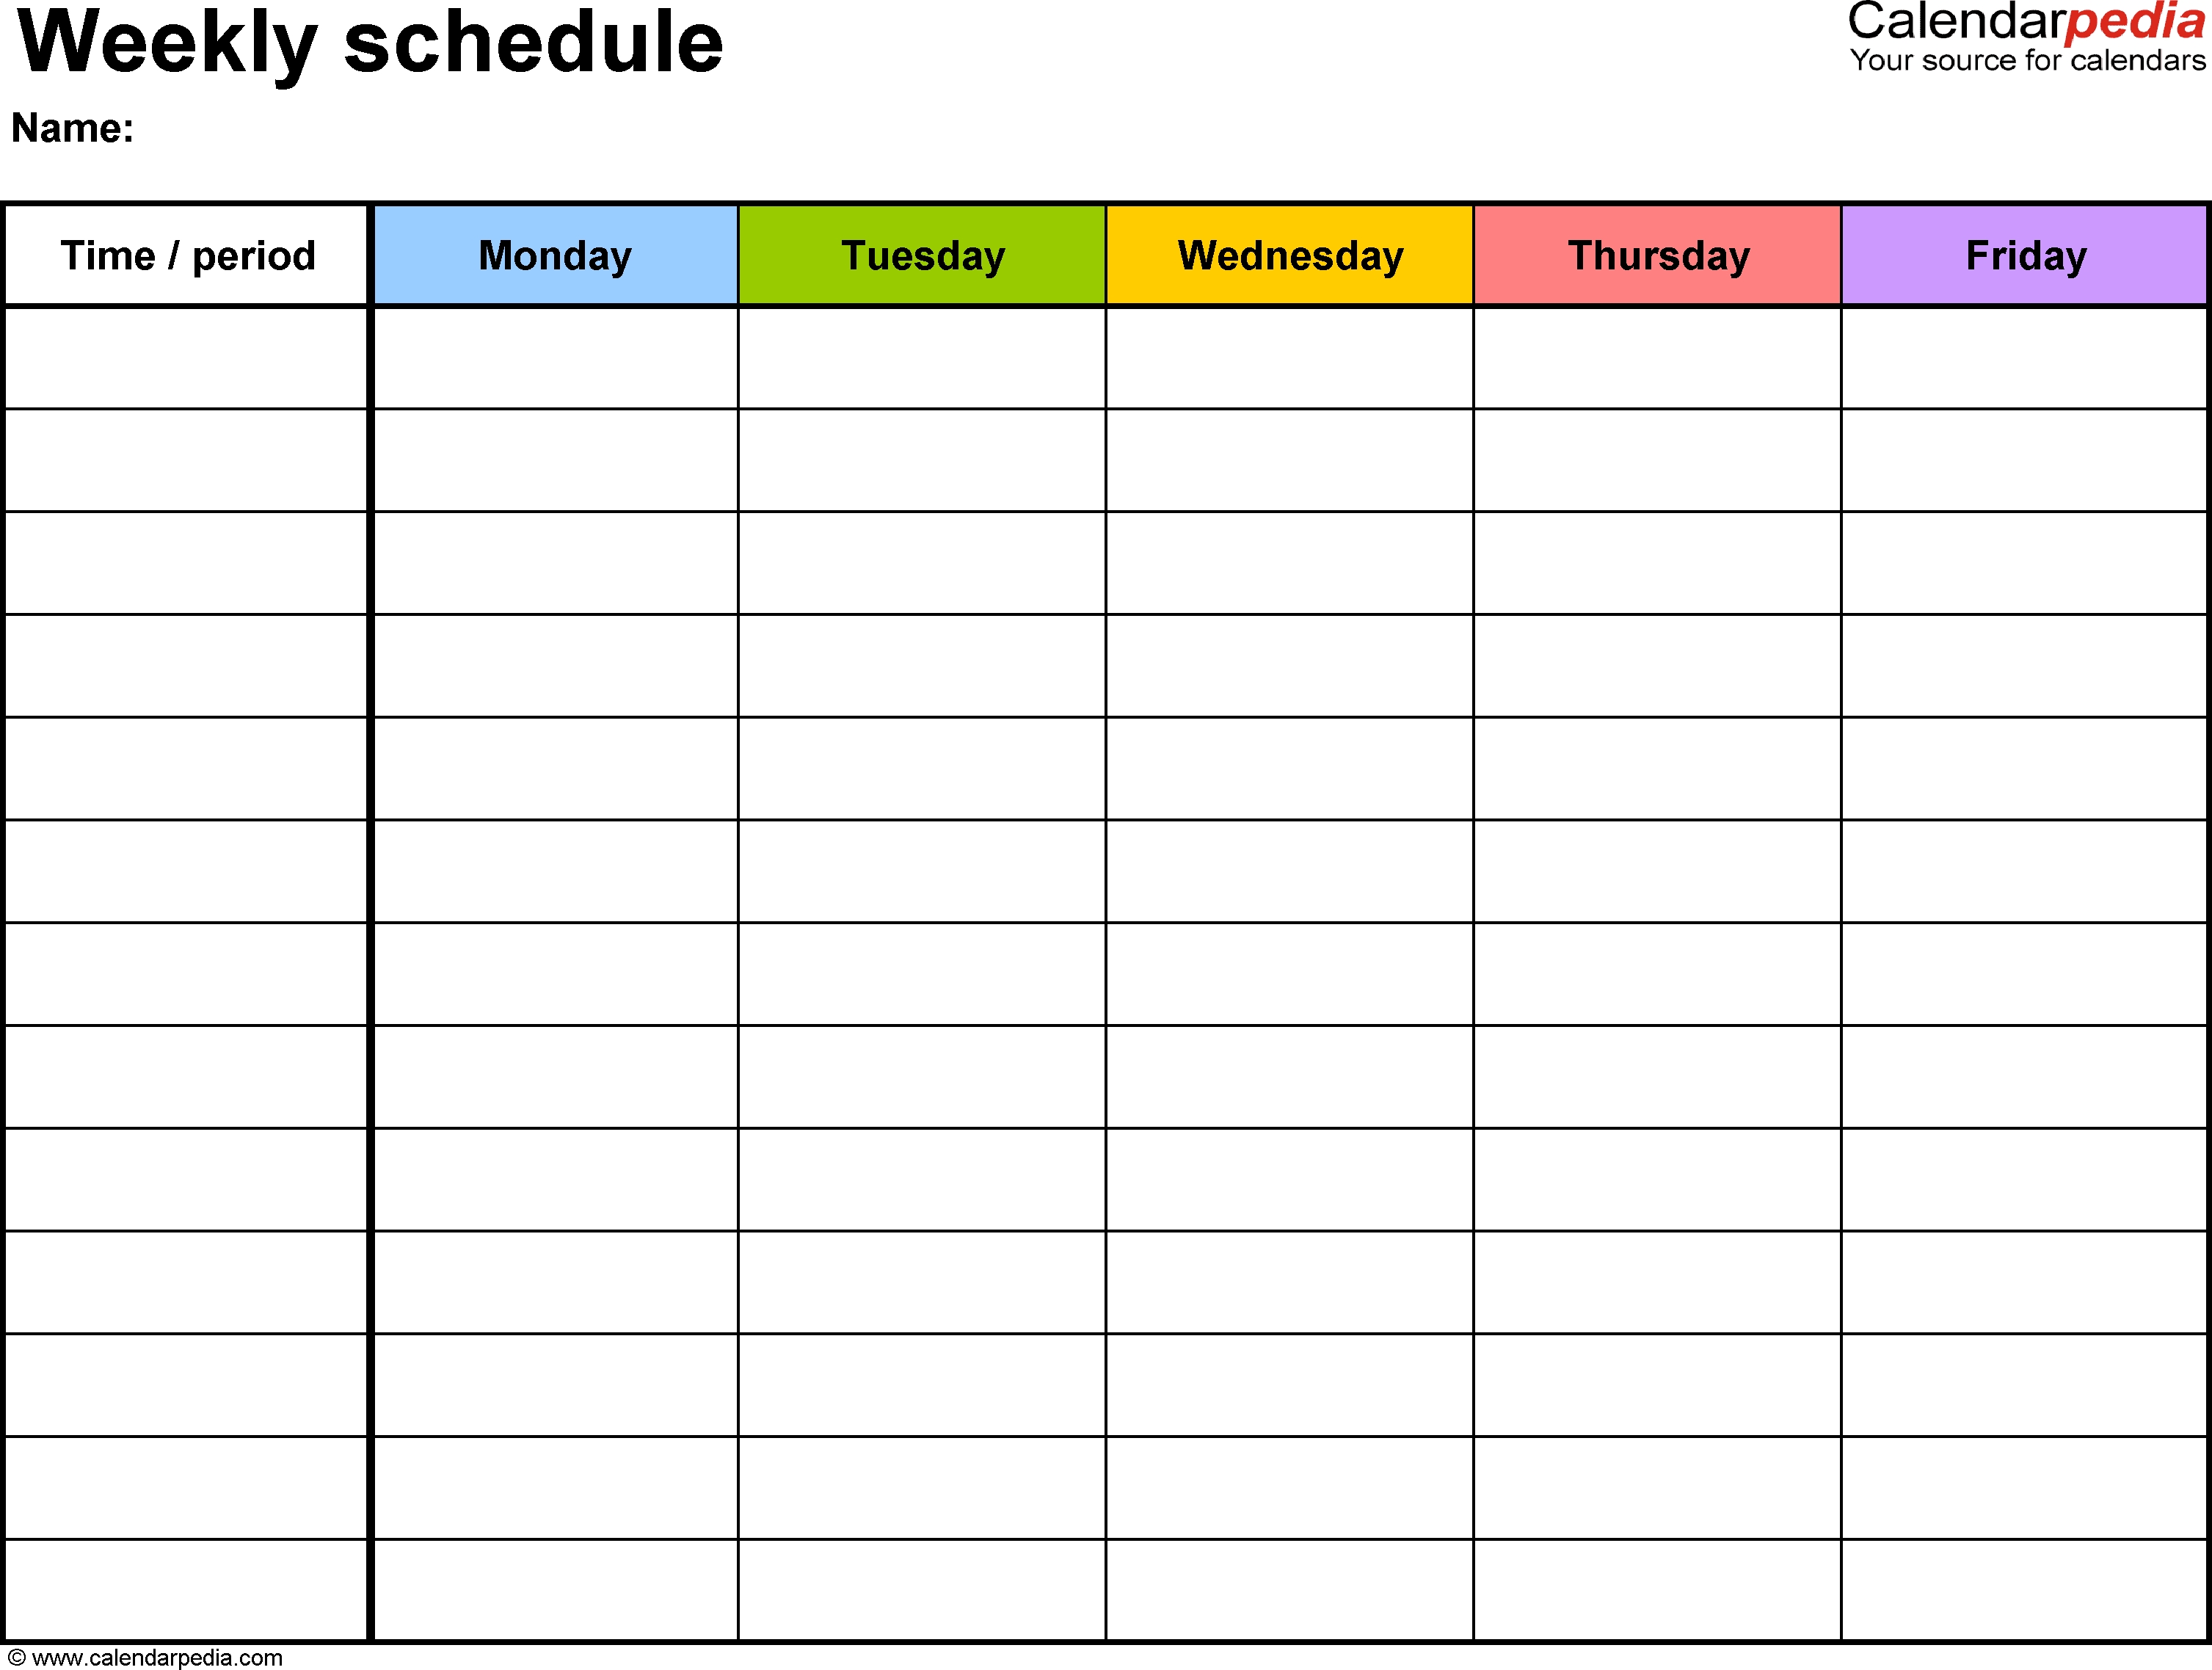 Free Weekly Schedule Templates For Pdf - 18 Templates throughout Pdf Daily Calendar With Time Slots